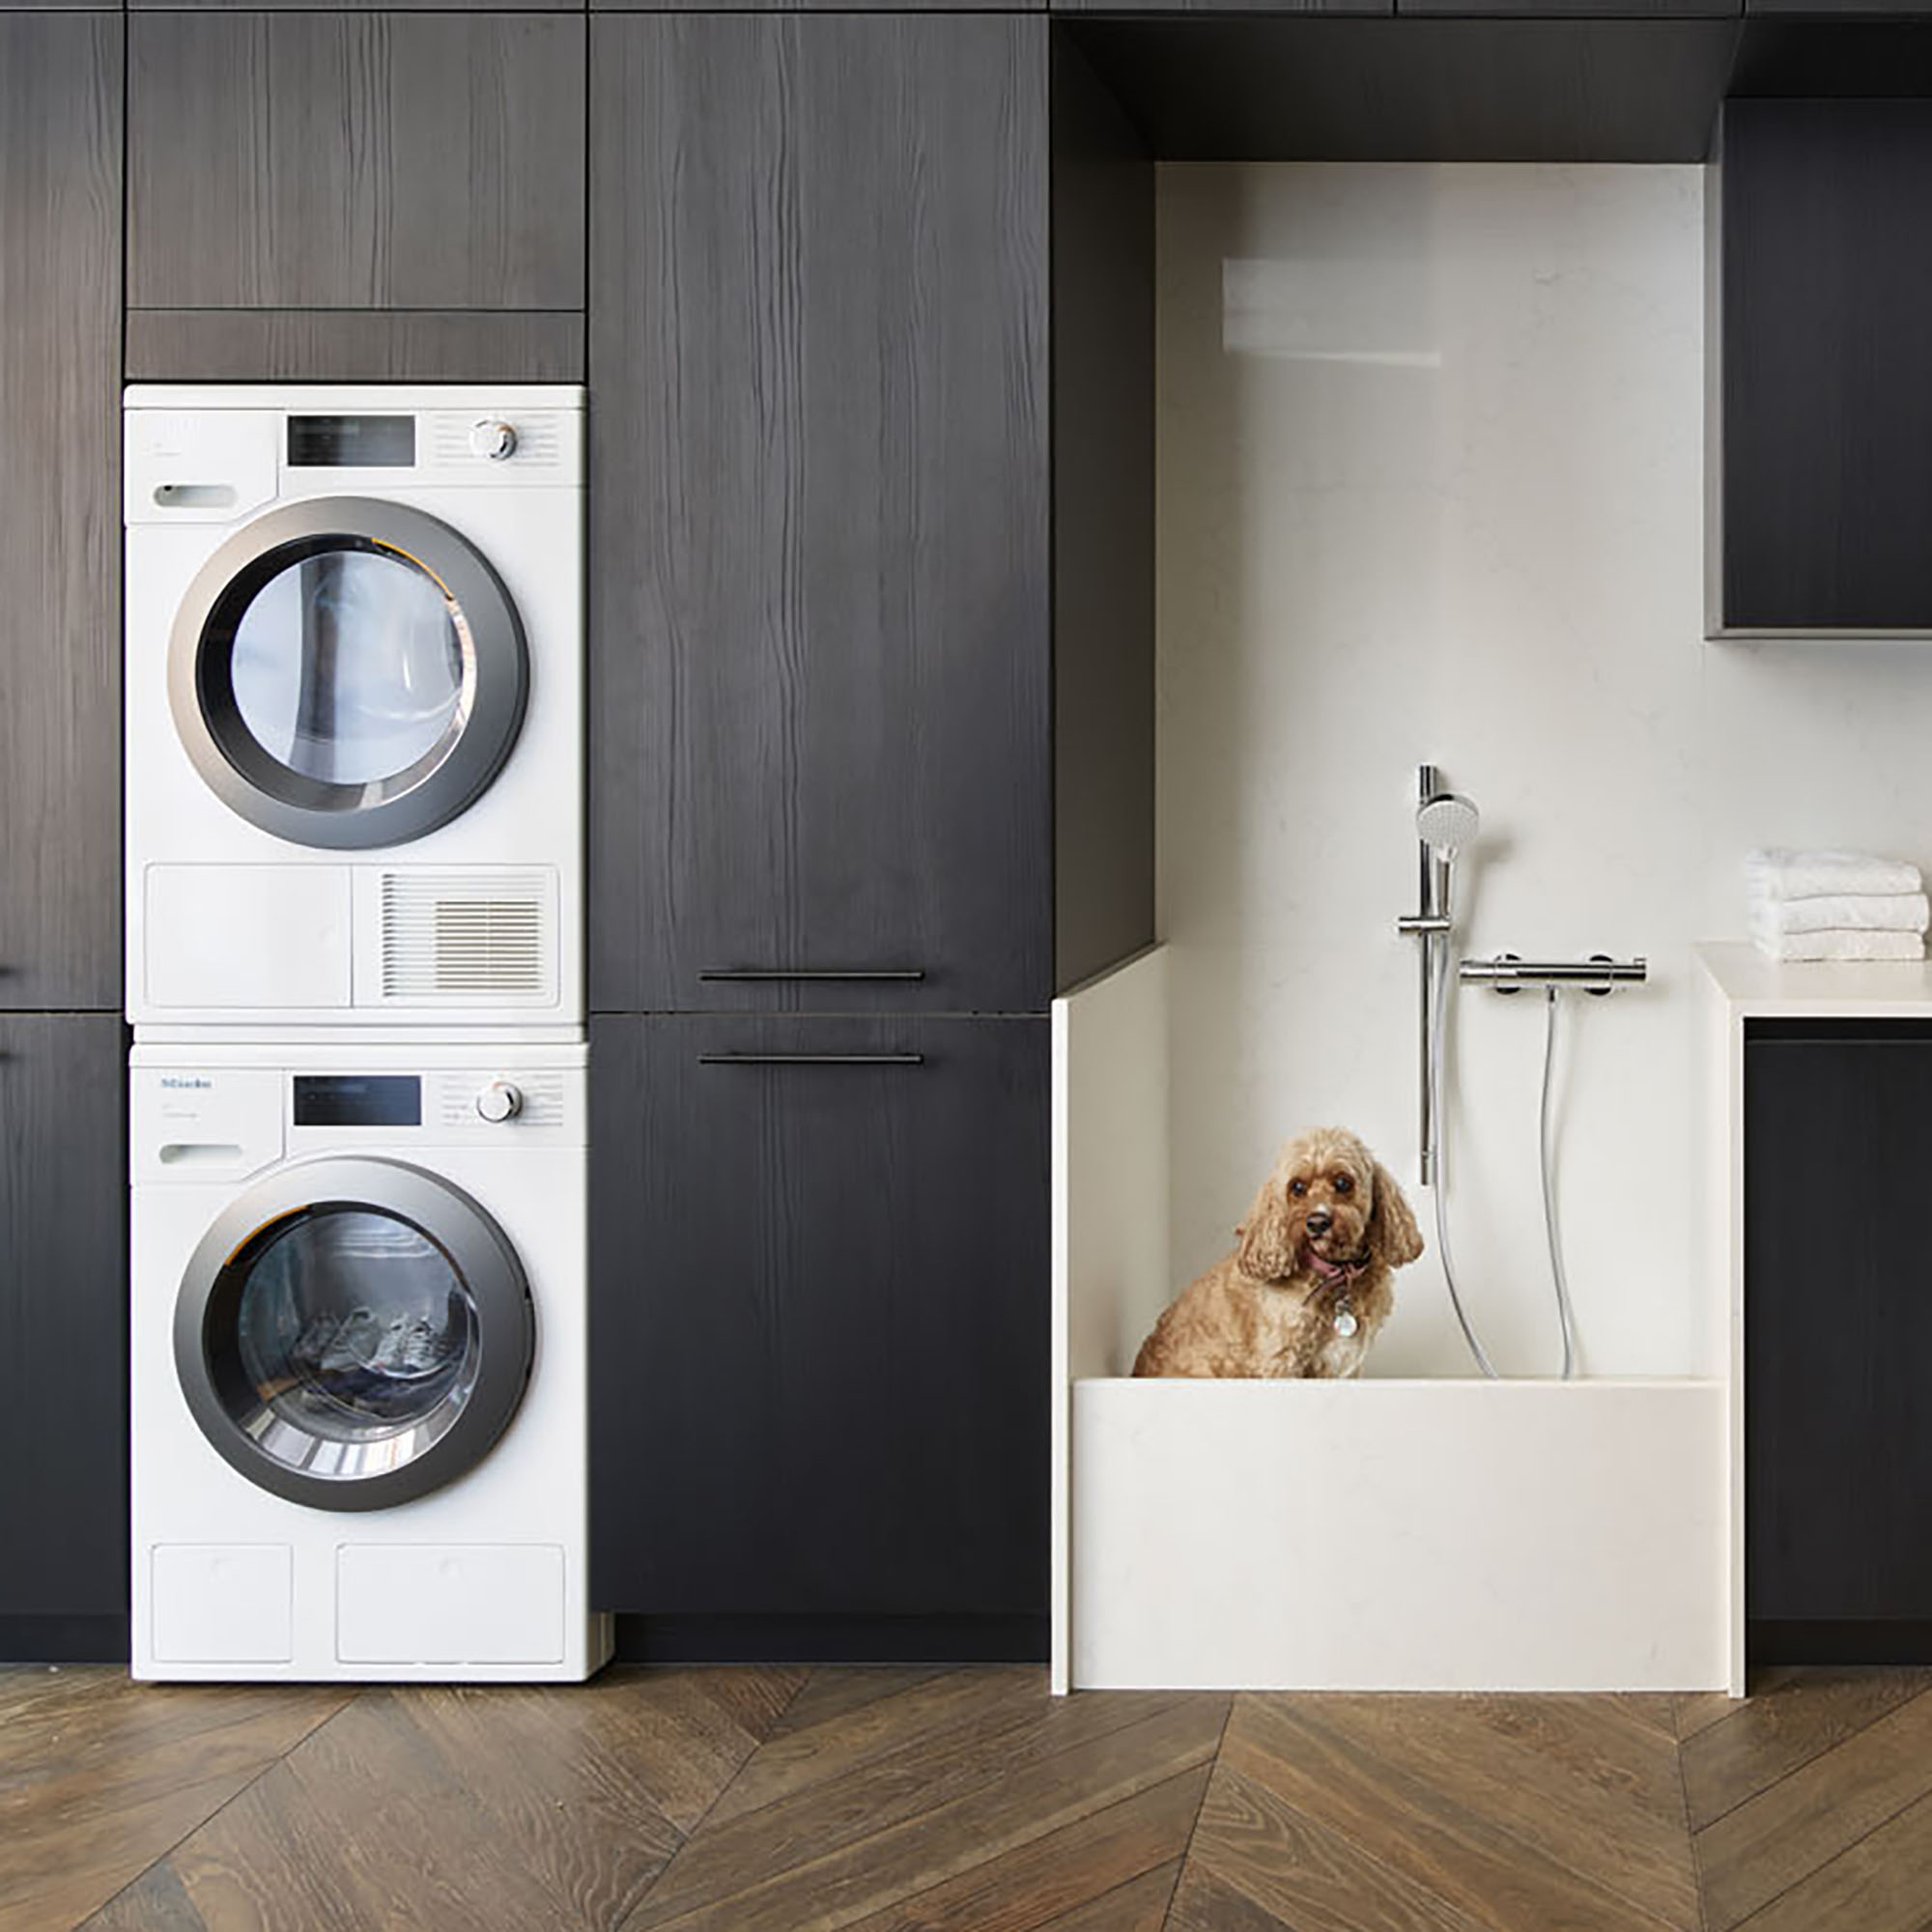 Utility room with navy units, stacked appliances and dog basin